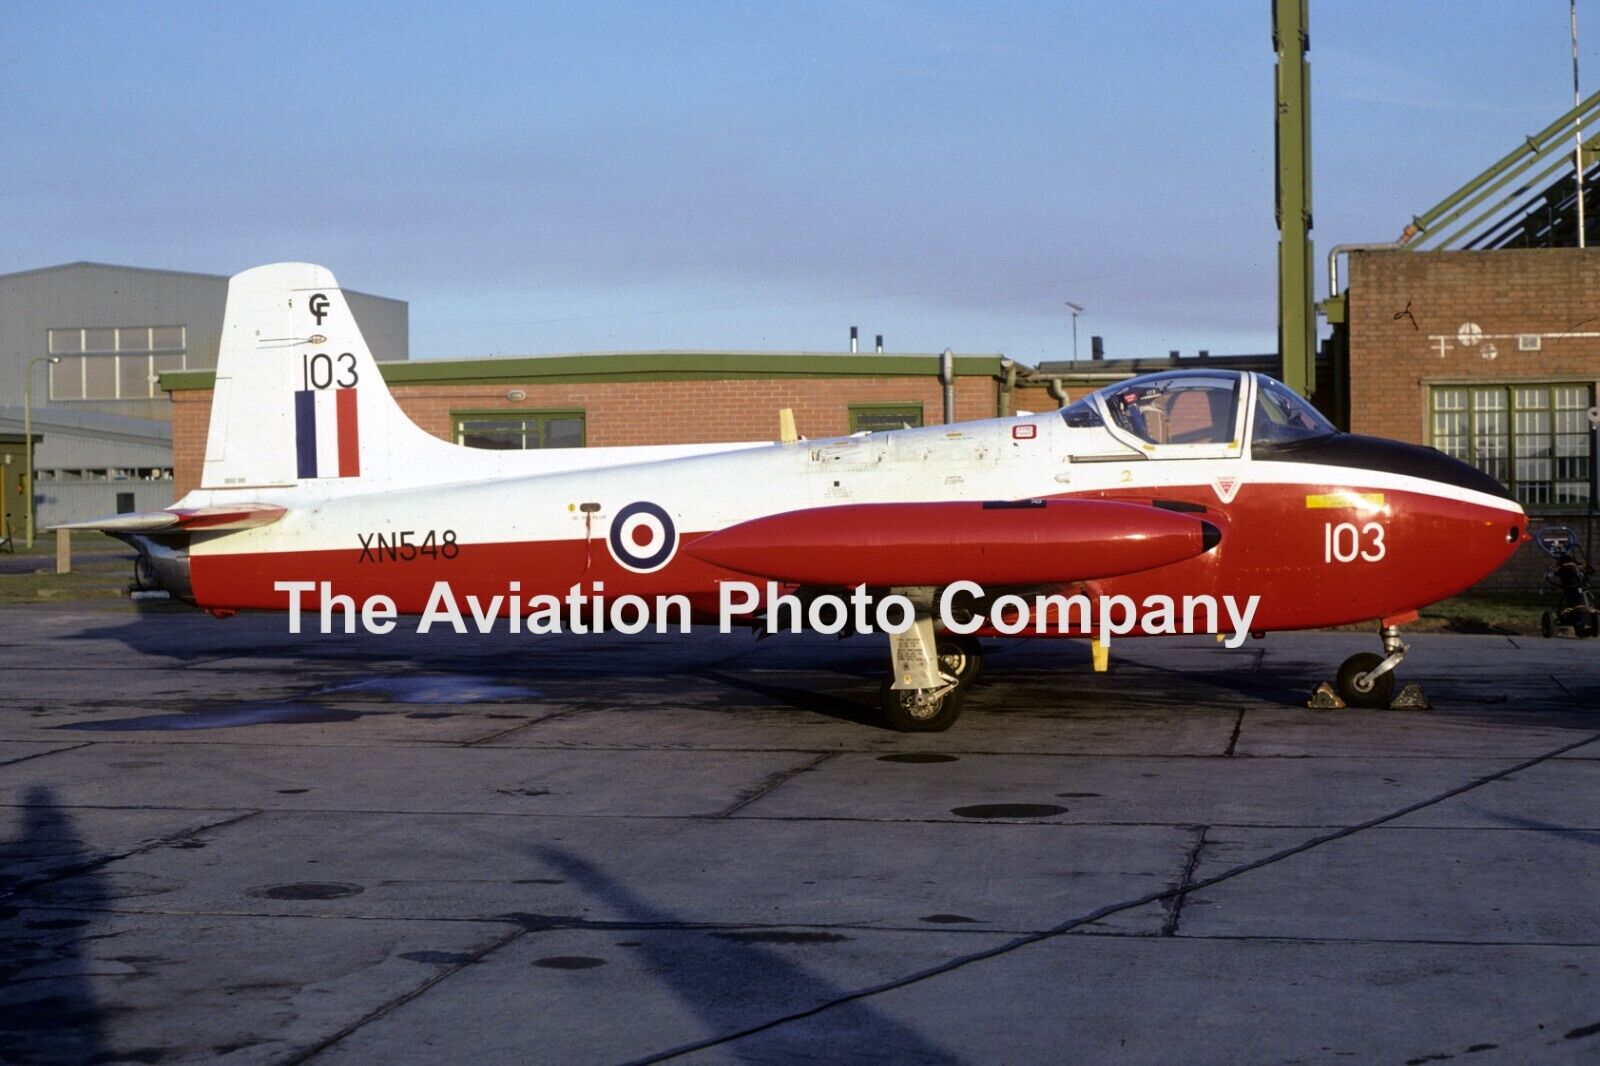 RAF 7 FTS Hunting Jet Provost T.3A XN548 at RAF Lossiemouth (1985) Photograph